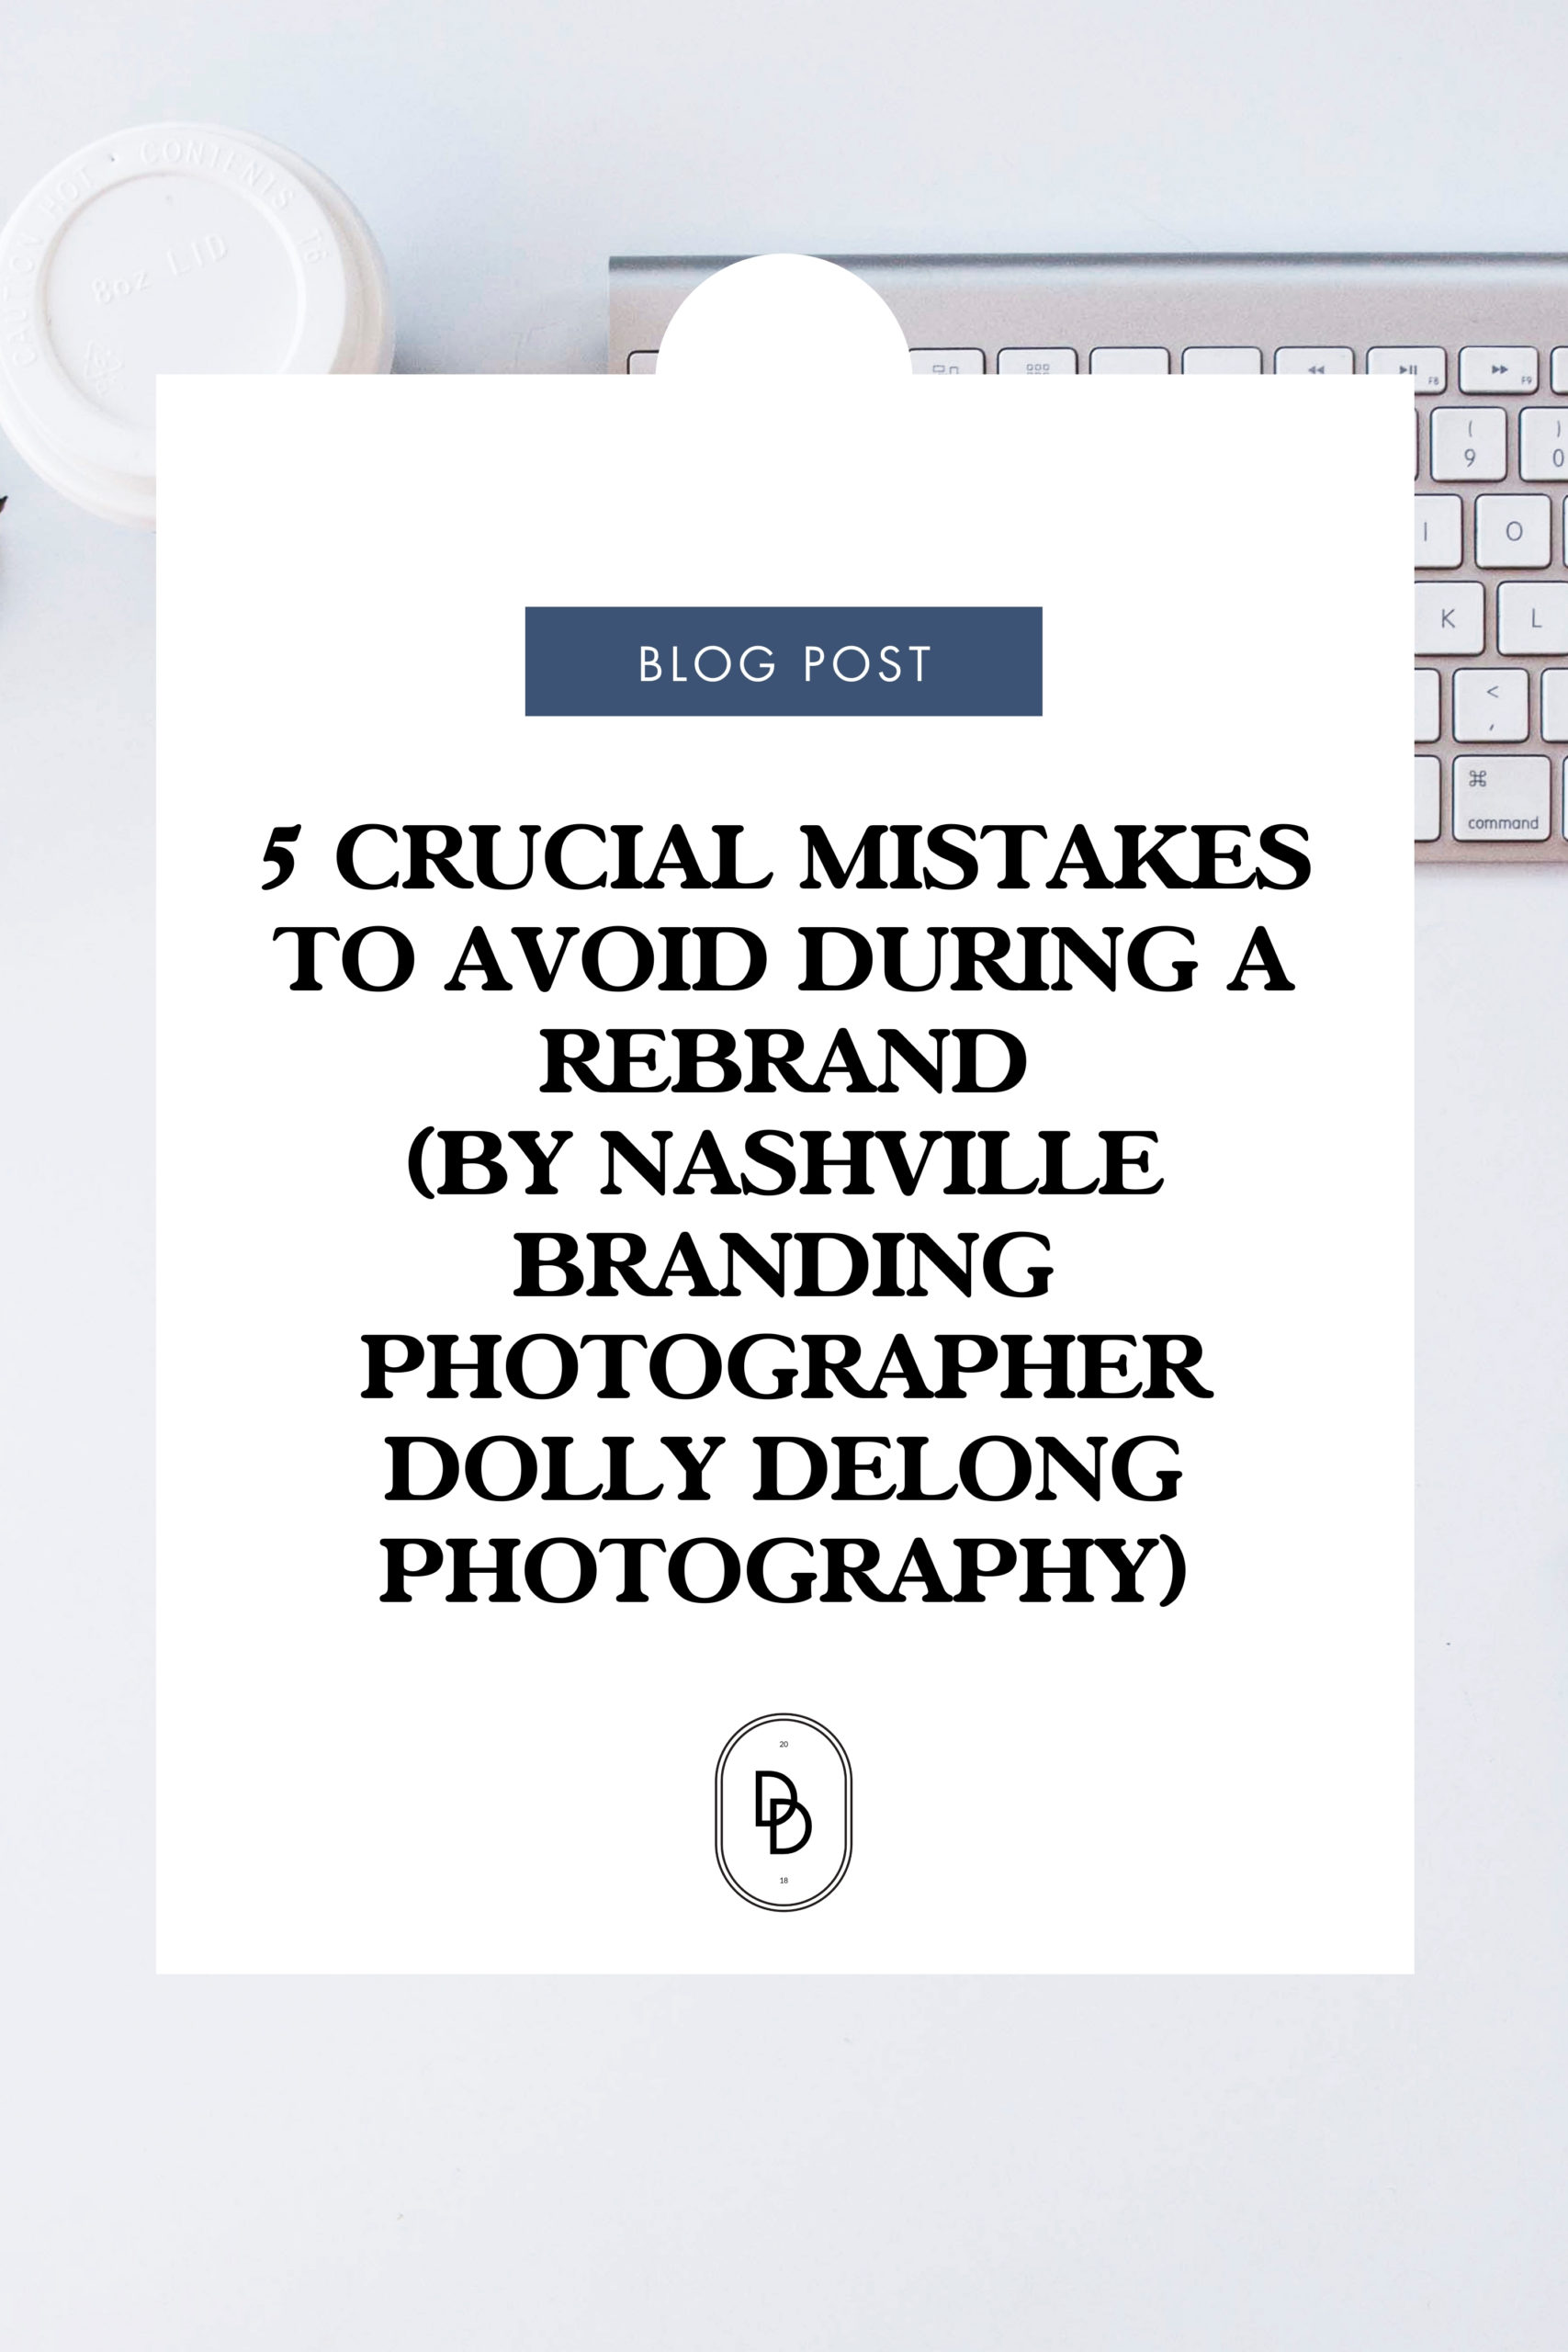 5 Crucial Mistakes to Avoid During a Rebrand Pinterest Text Image by Nashville Branding Photographer Dolly DeLong Photography